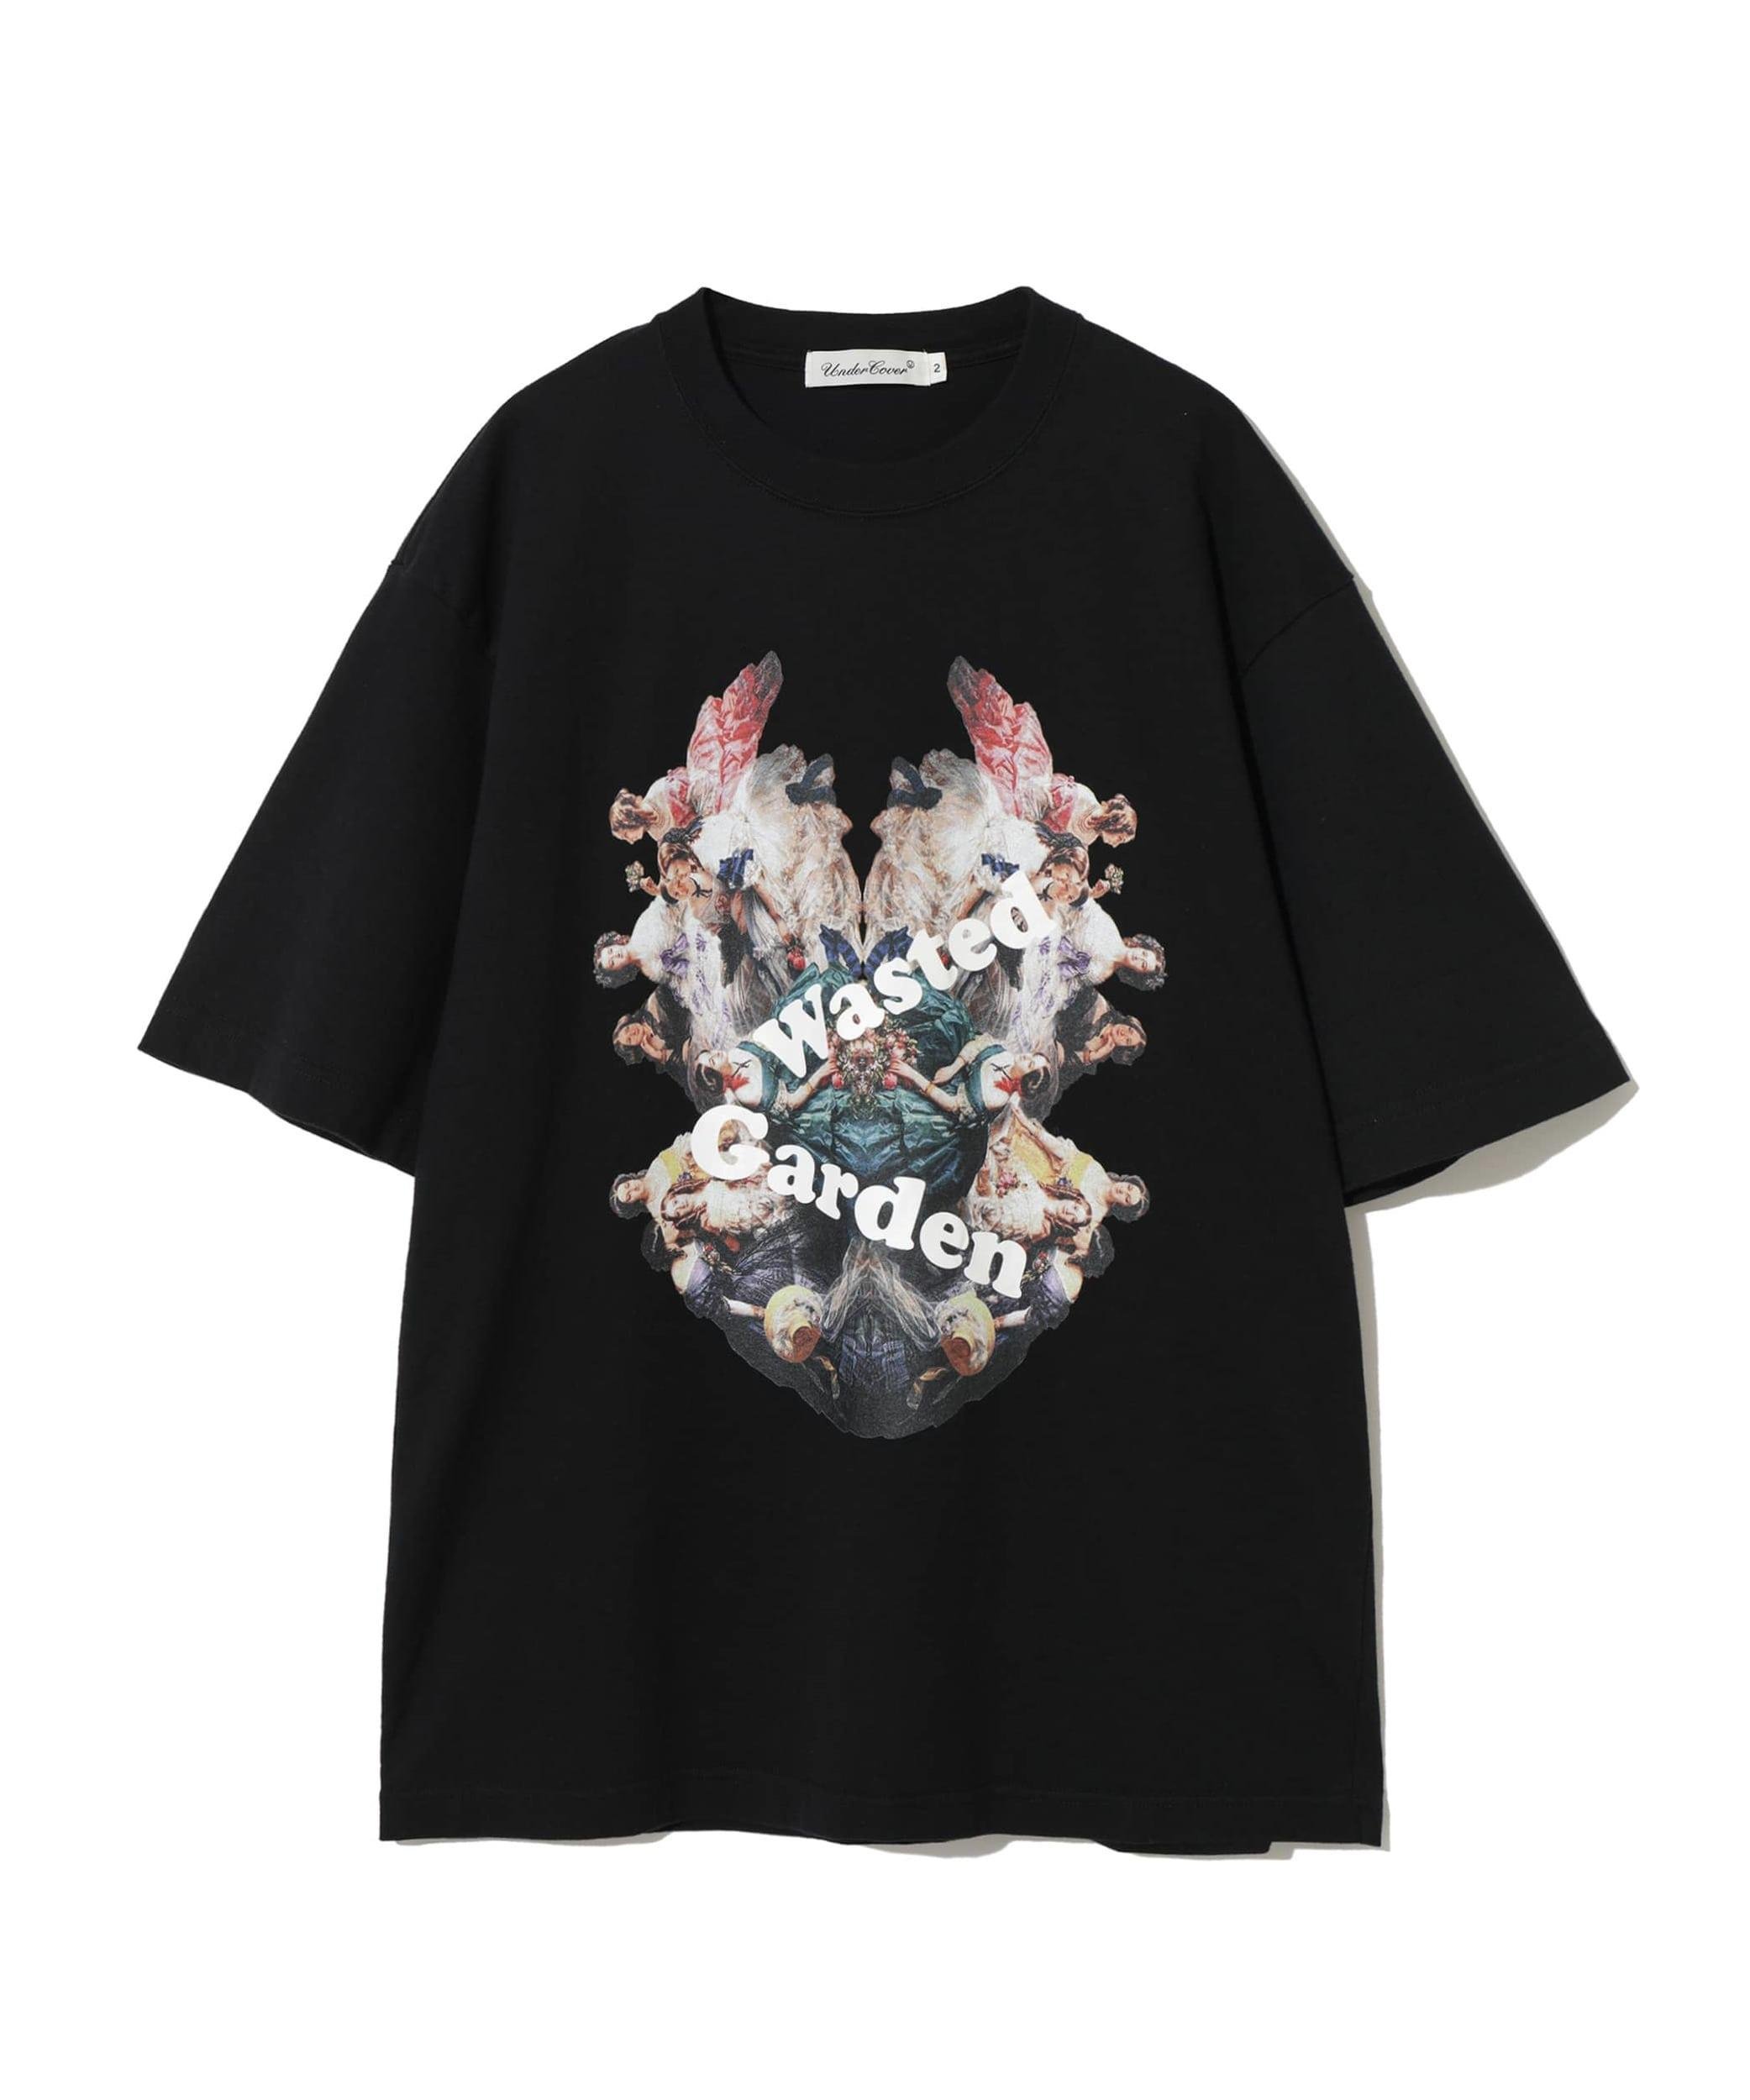 Undercover - Wasted Garden T-Shirt - (Black) by UNDERCOVER